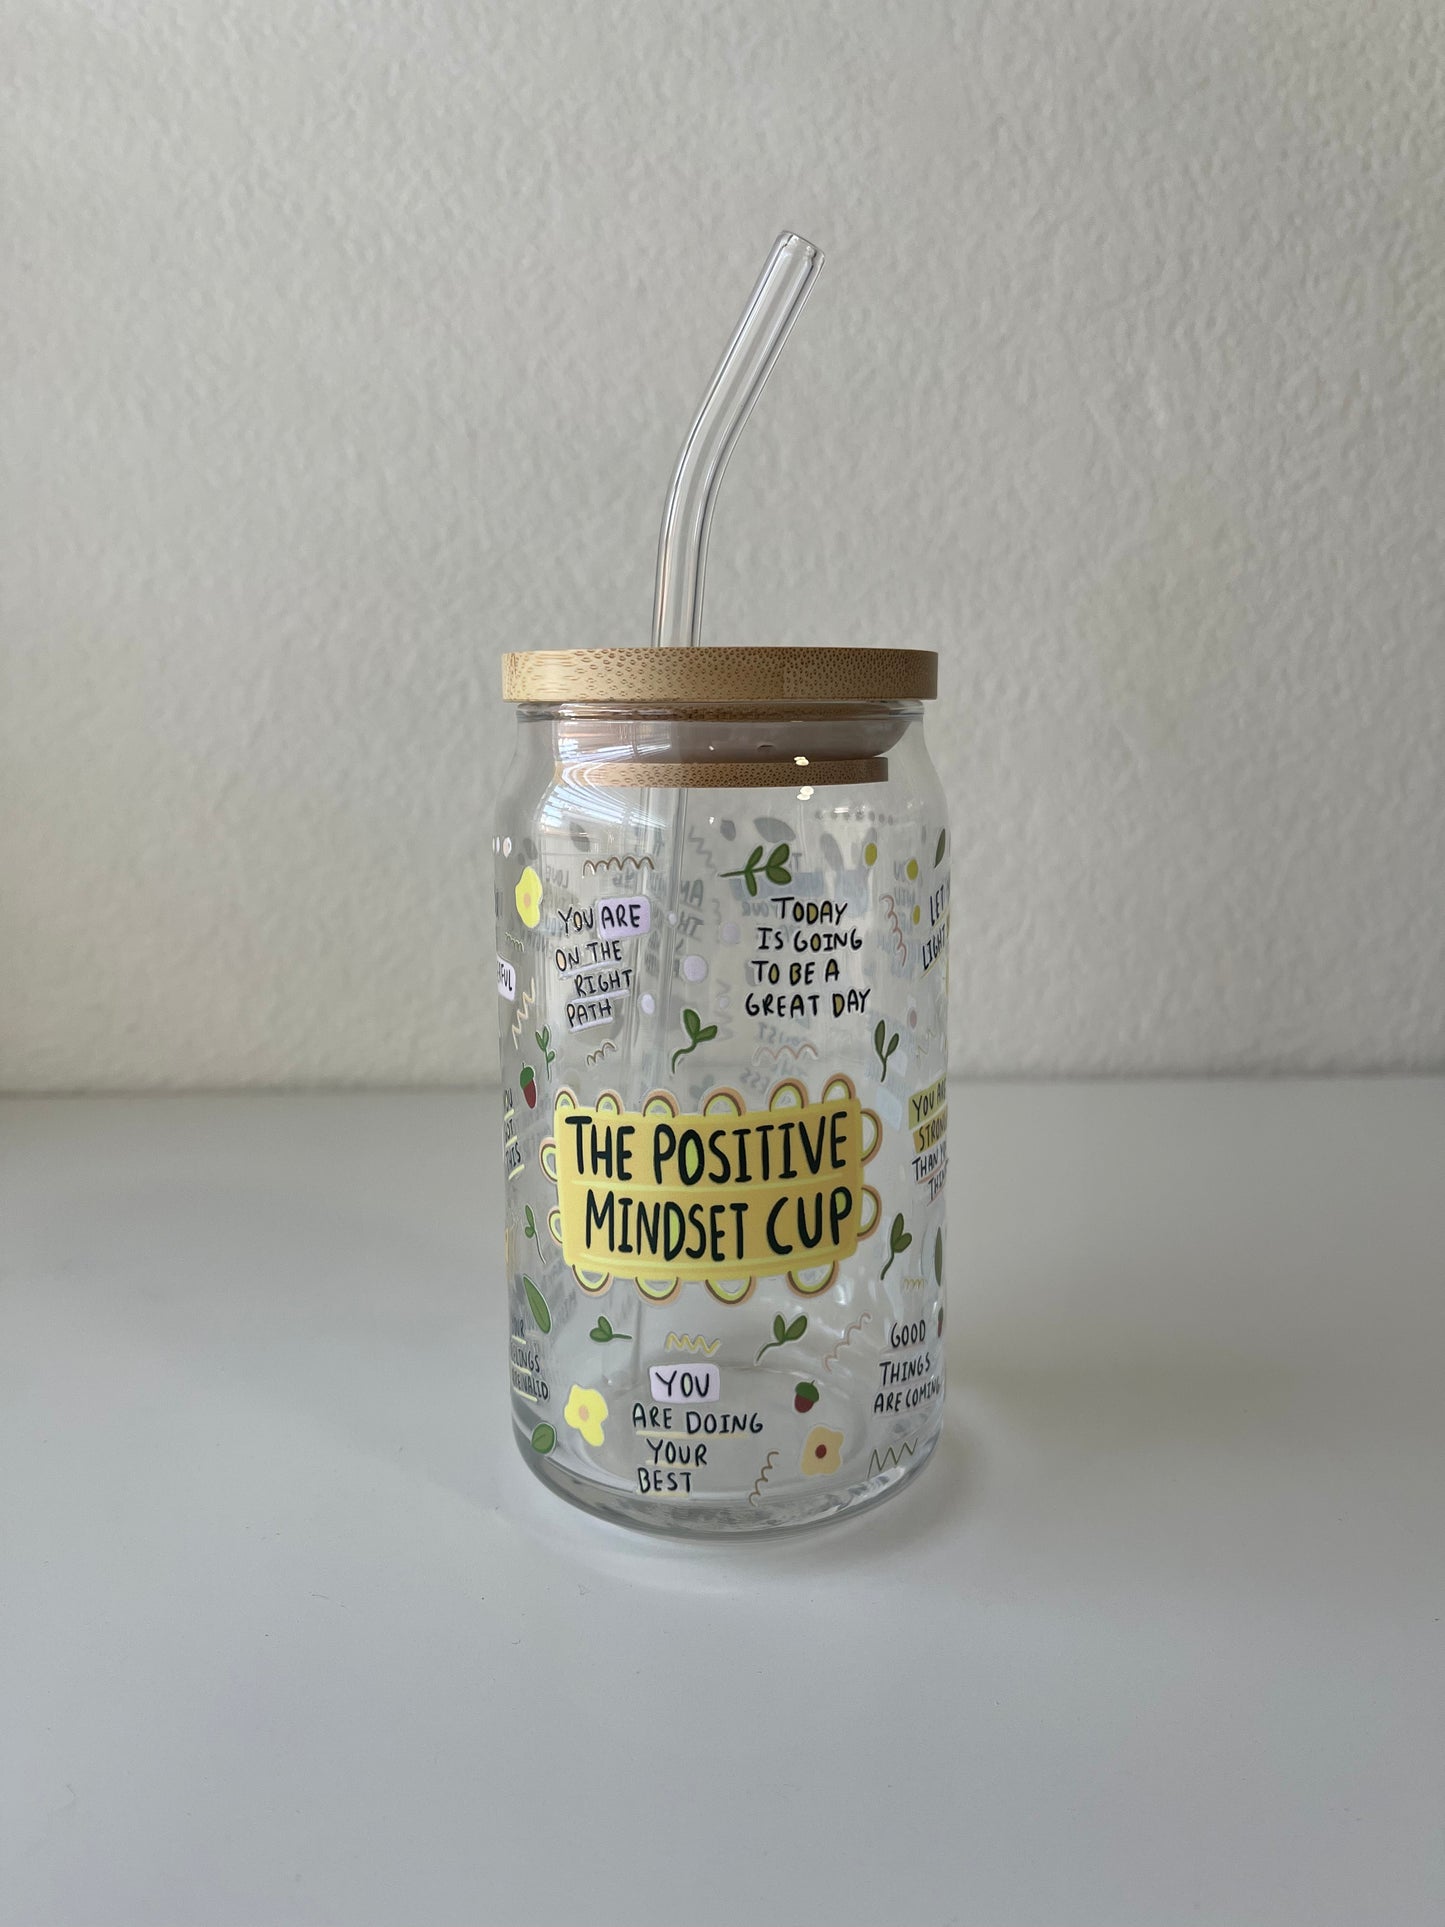 The positive mindset cup